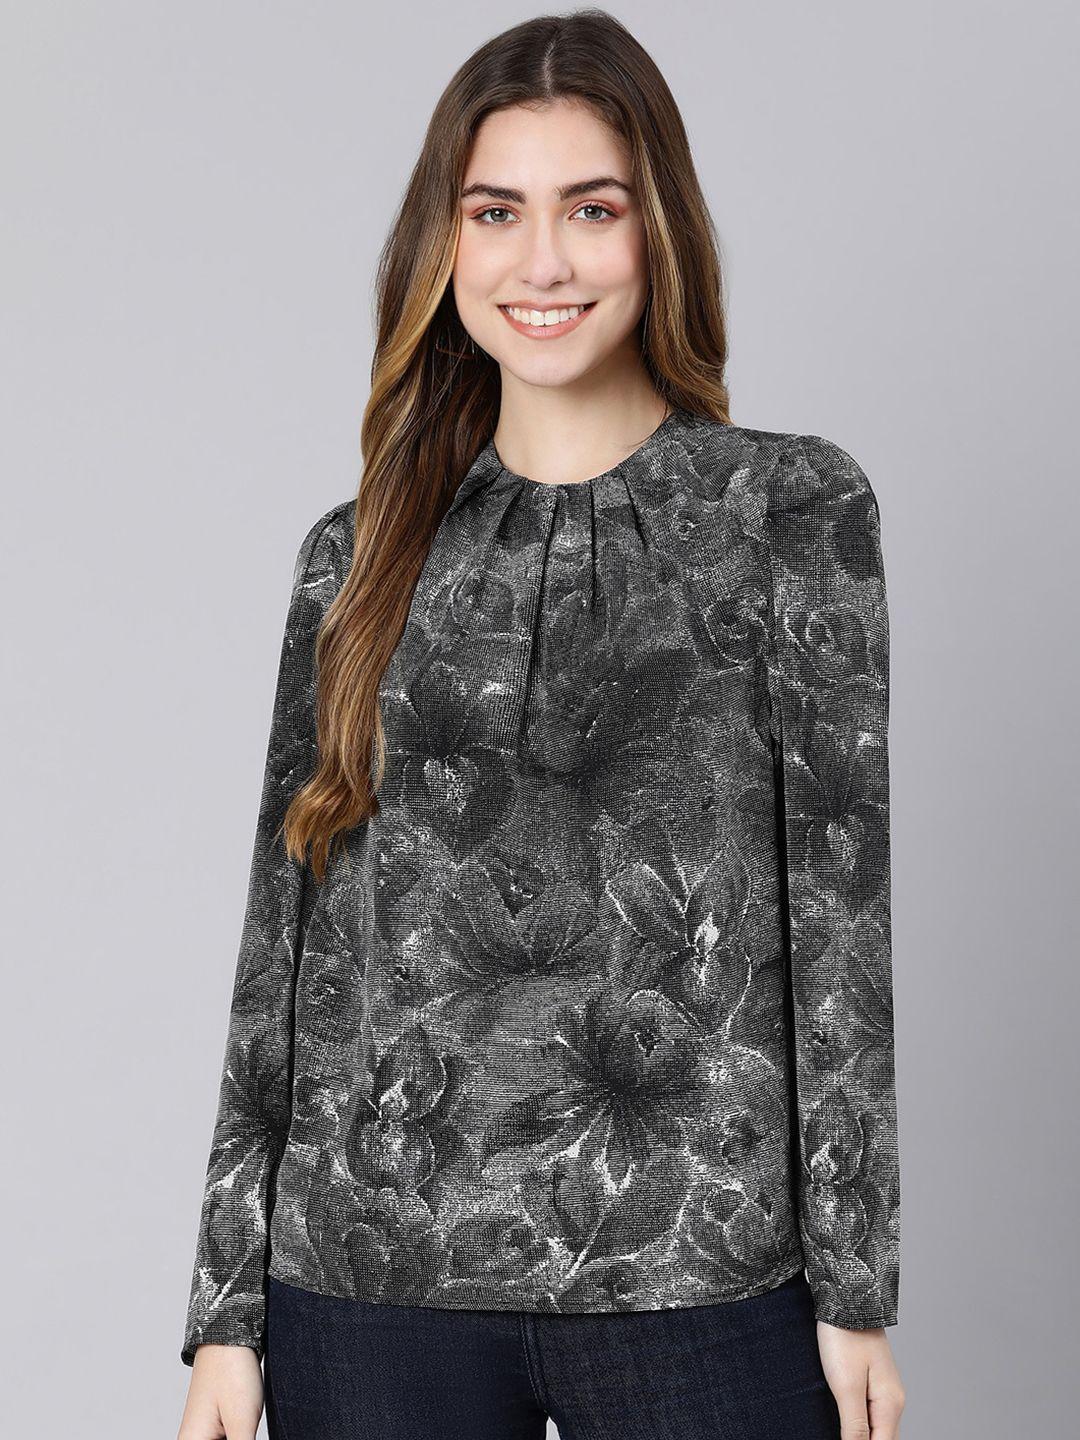 oxolloxo-black-&-grey-floral-printed-full-sleeves-satin-top